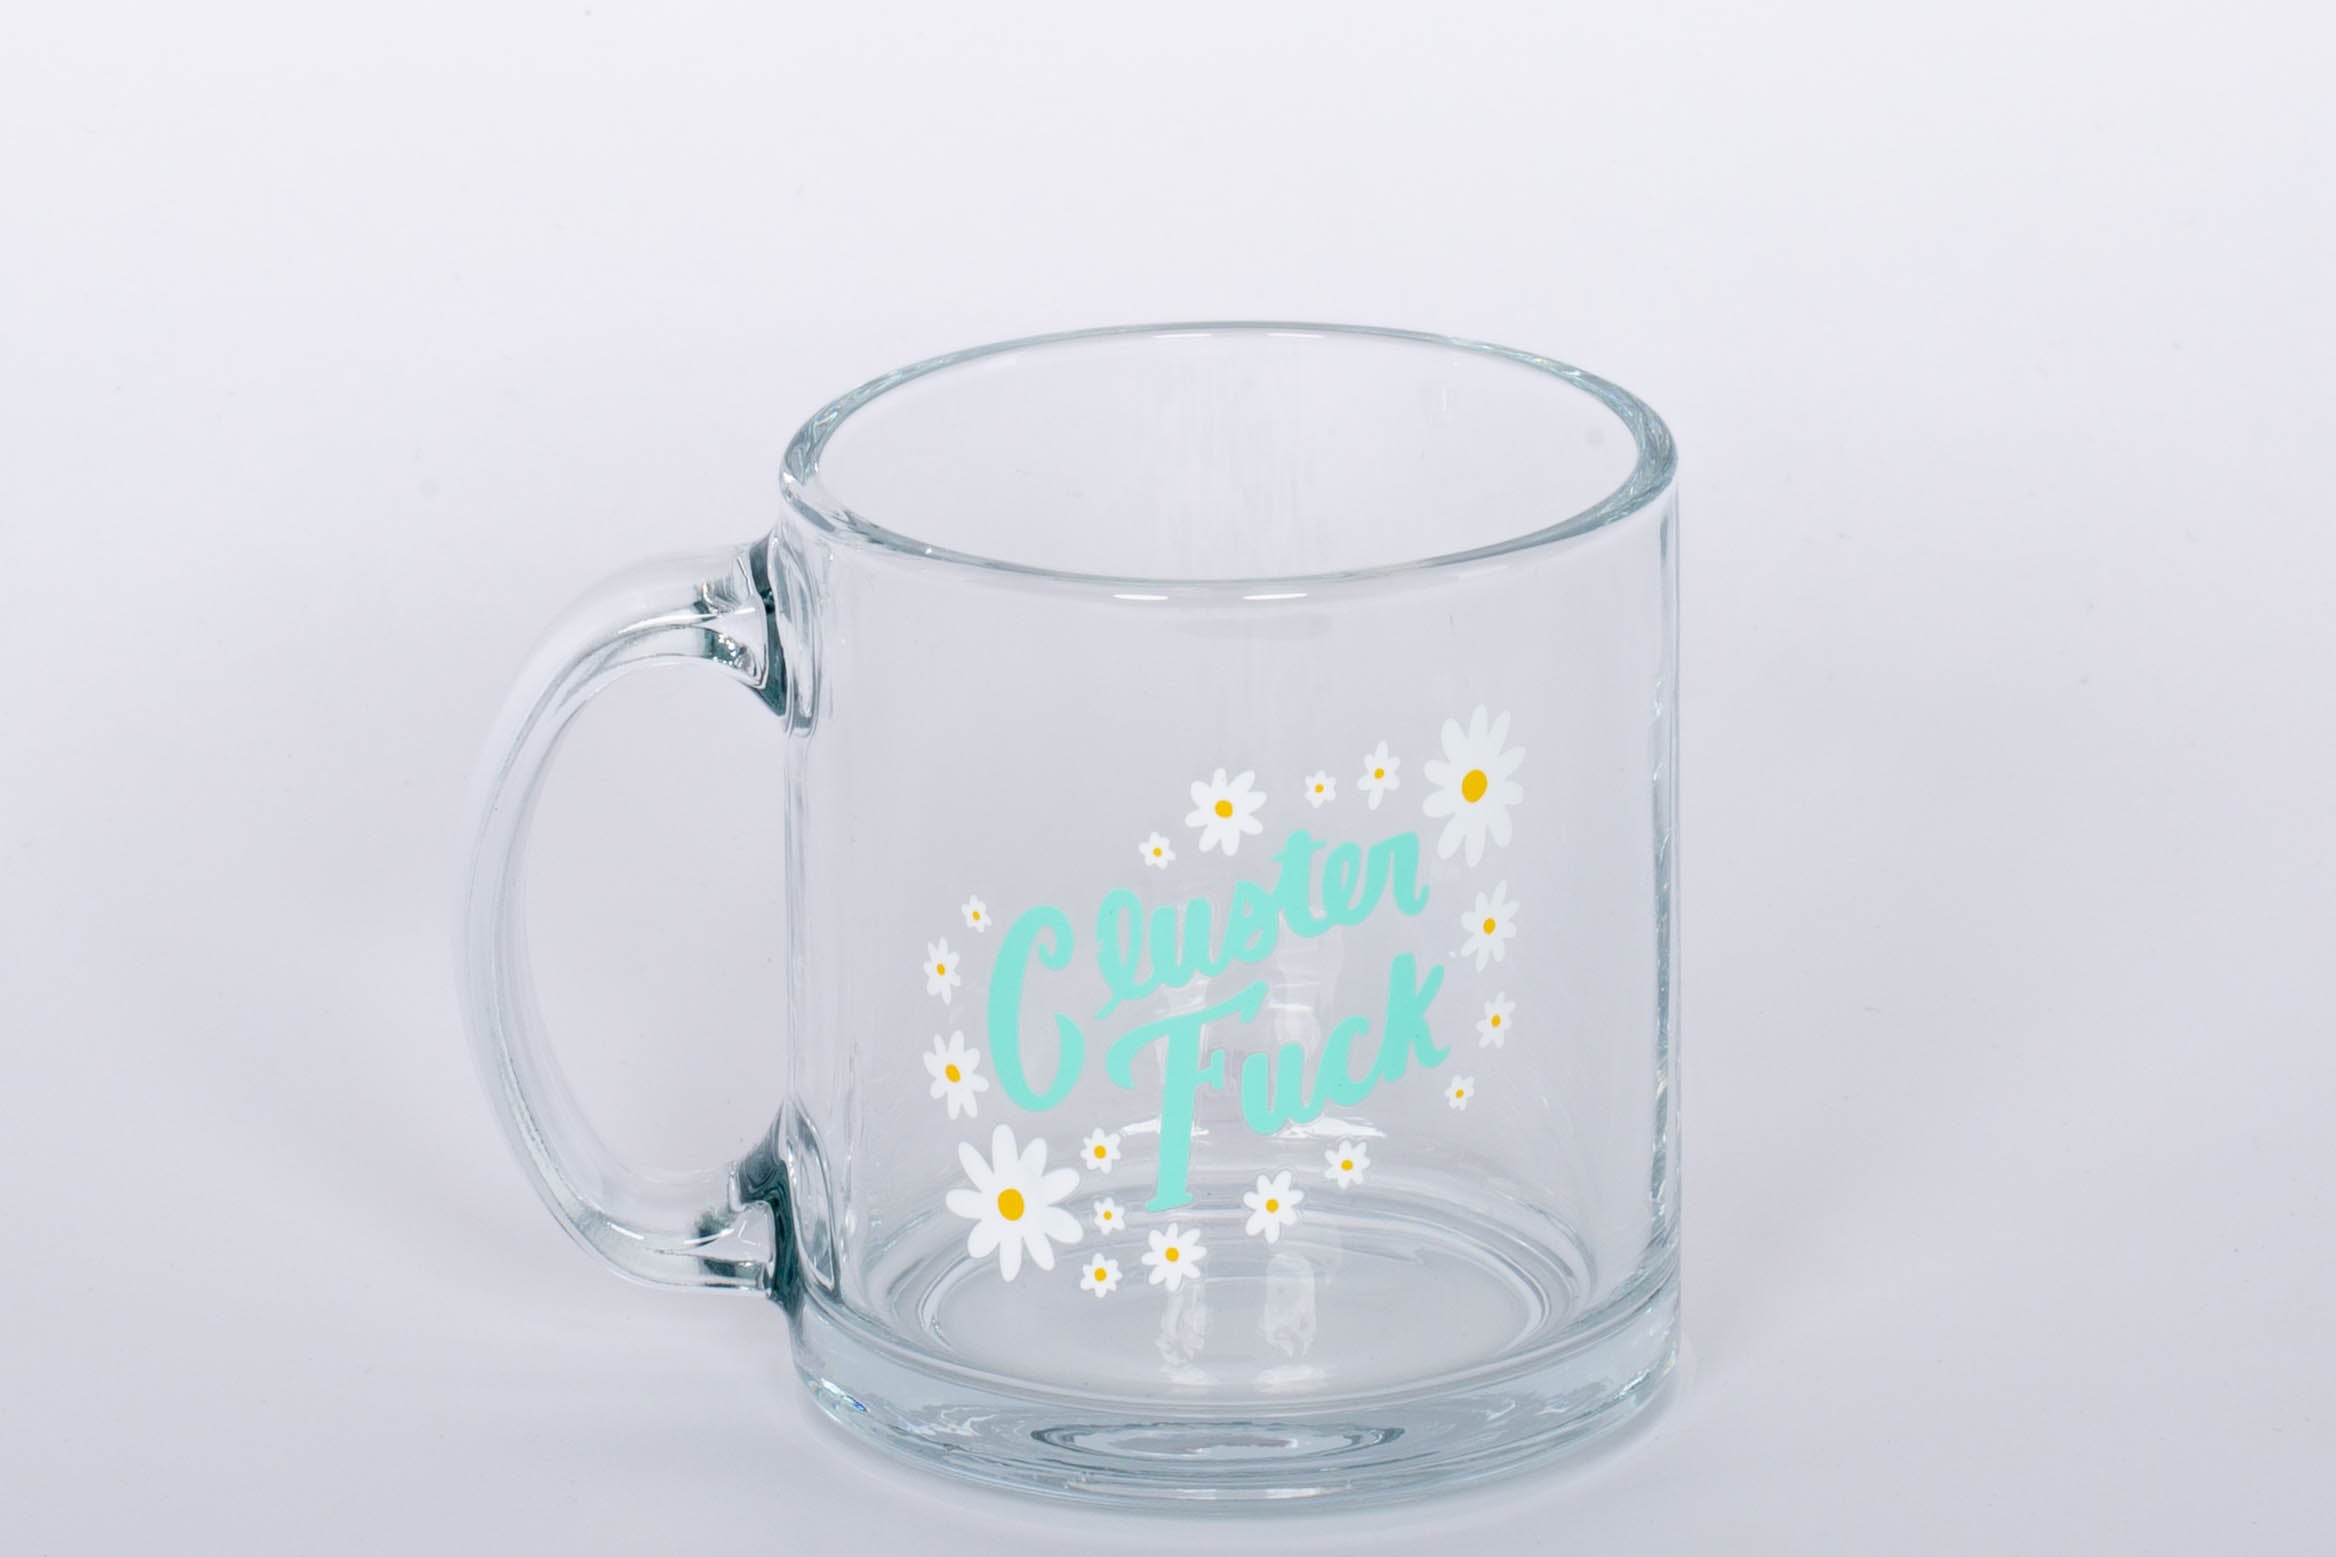 "Cluster Fuck Mug" Glass mug with blue type and white and yellow flower design.